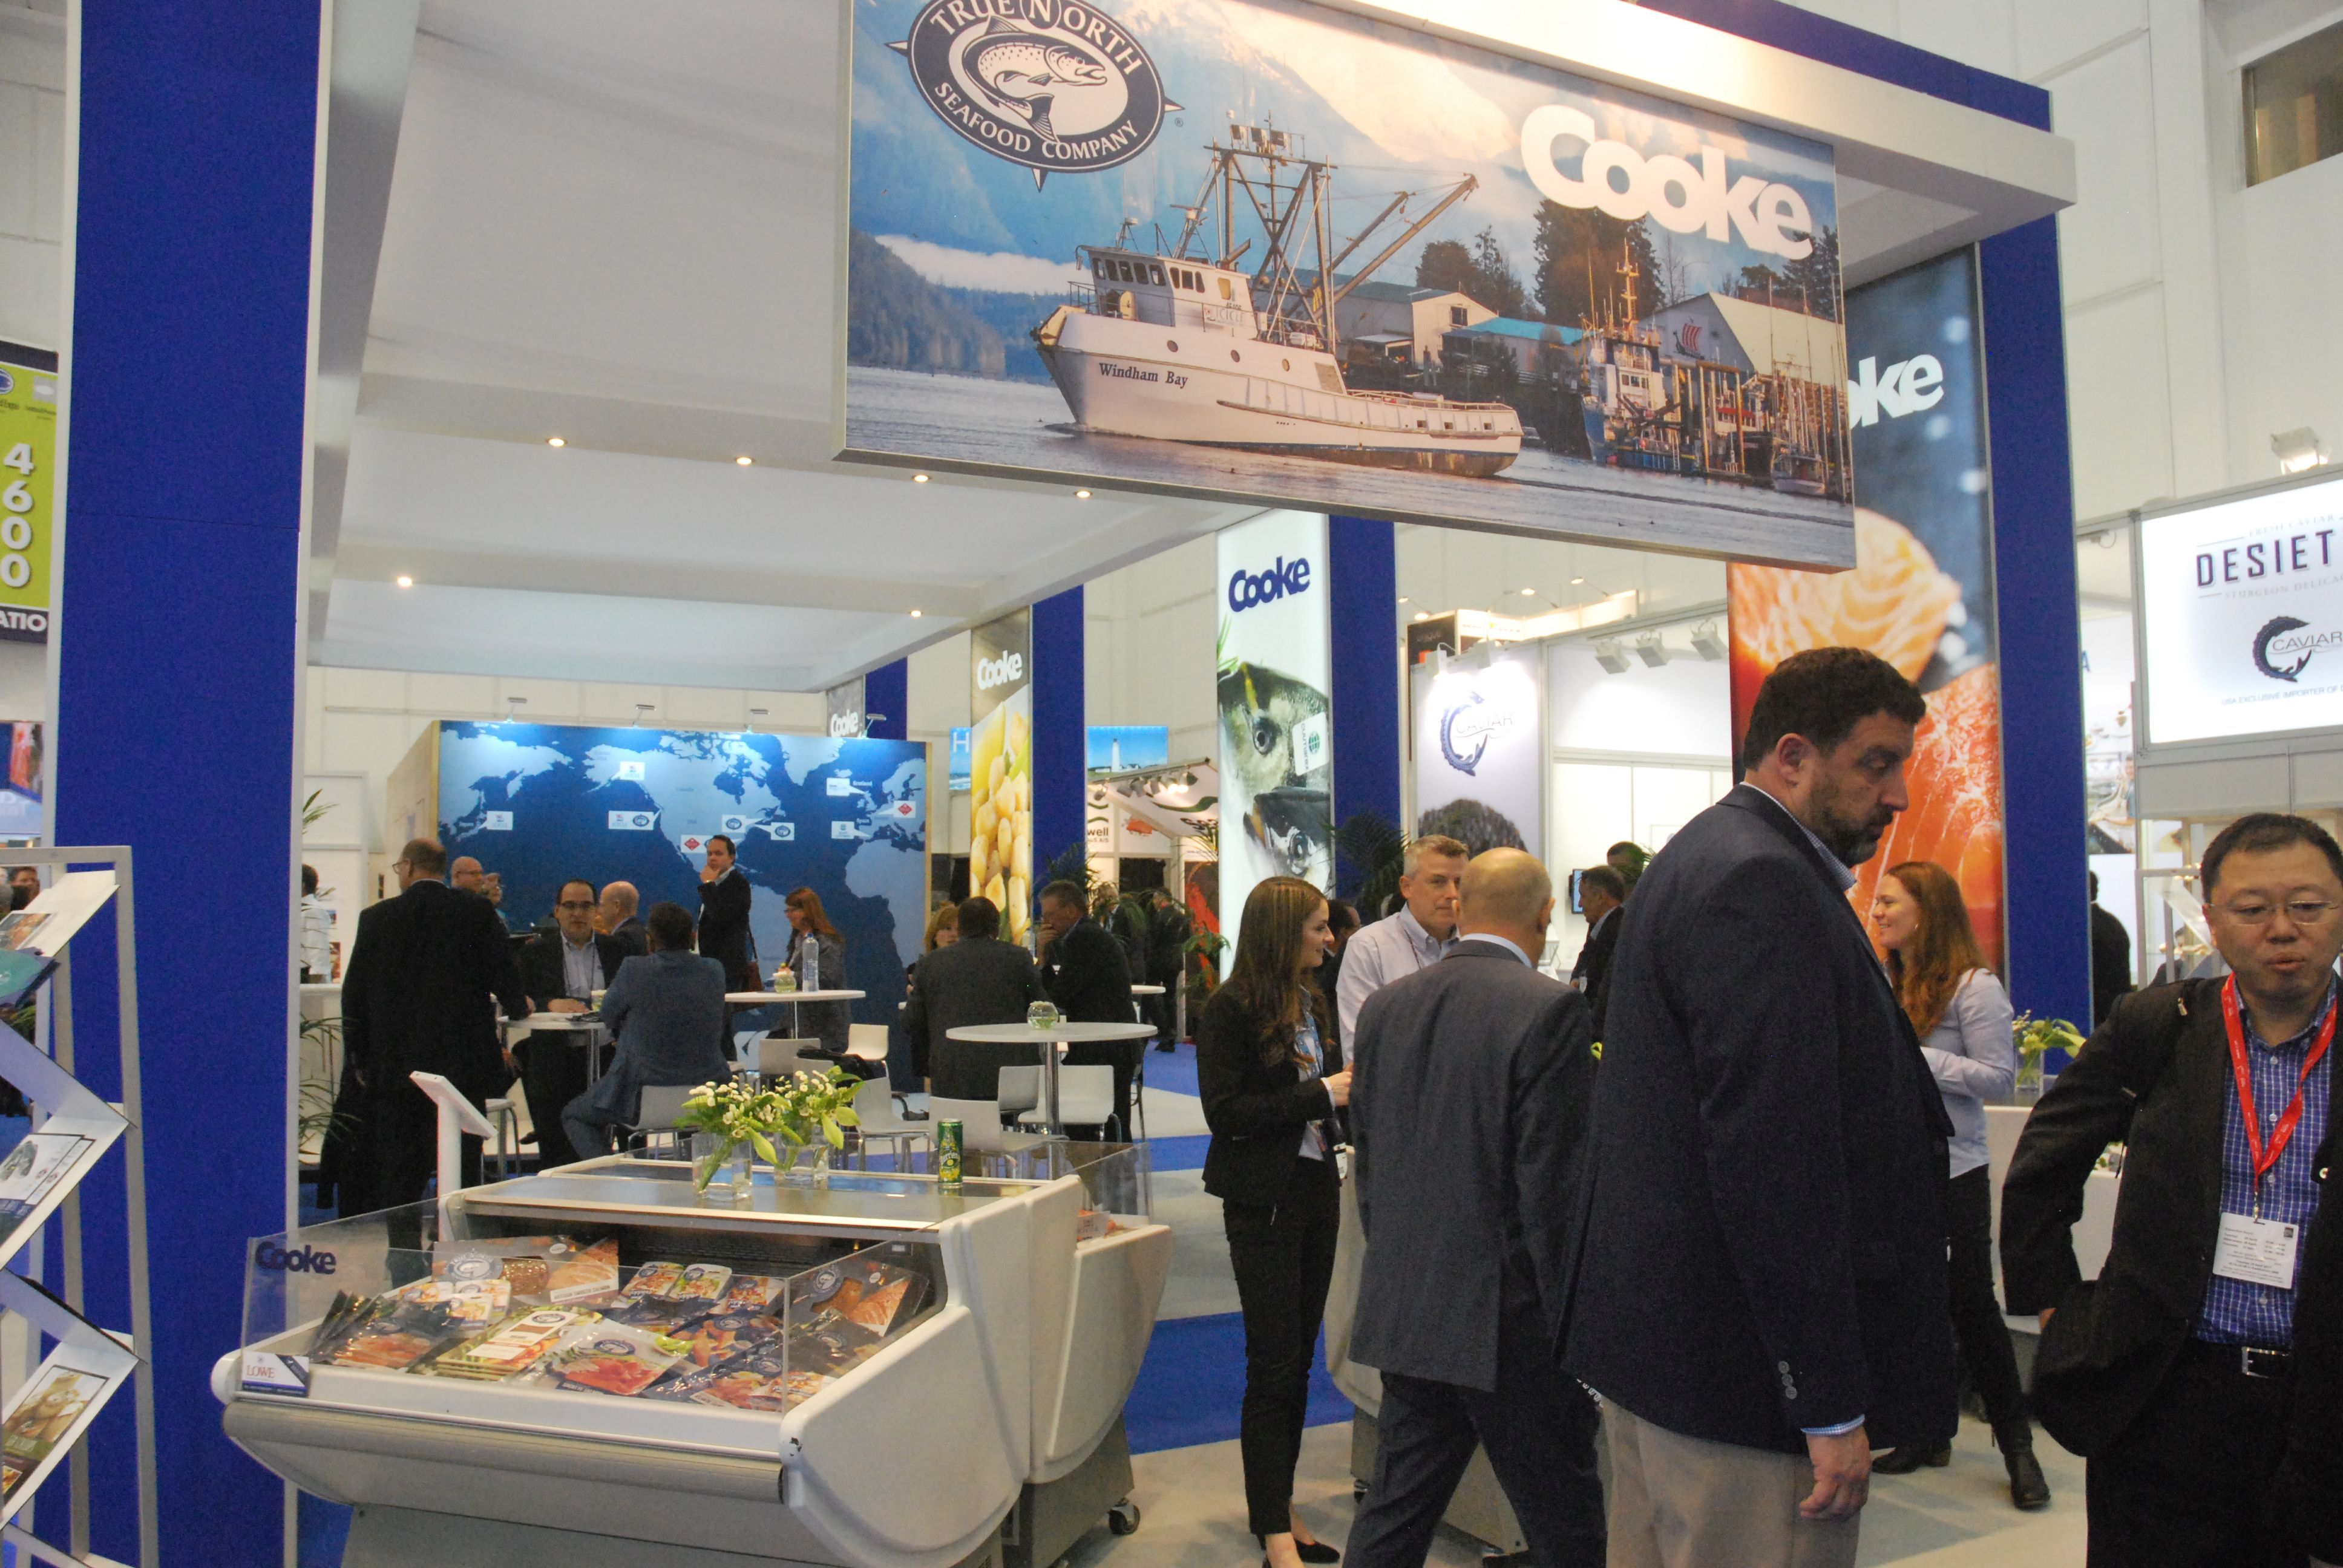 Cooke Aquaculture's stand at the busy Seafood Expo Global in Brussels